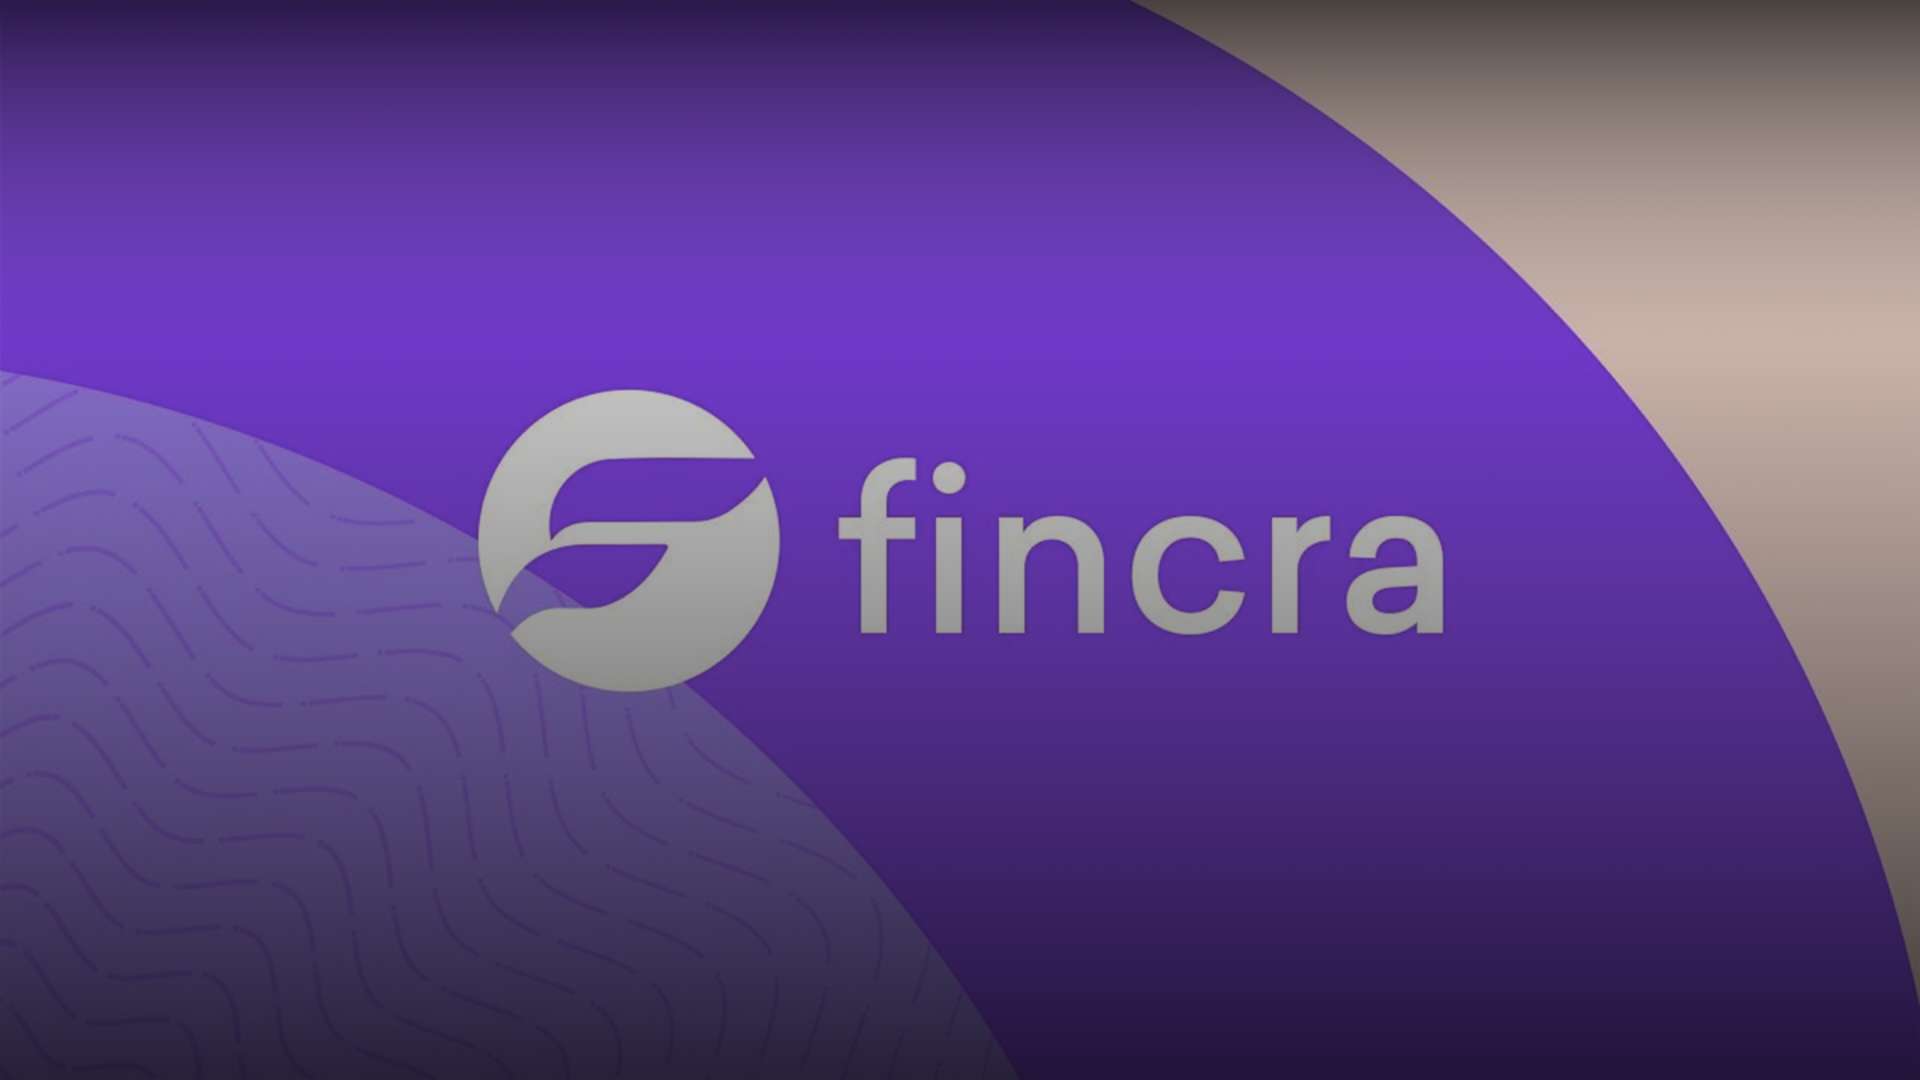 Building Our Brand: Fincra’s Creative Digital Style